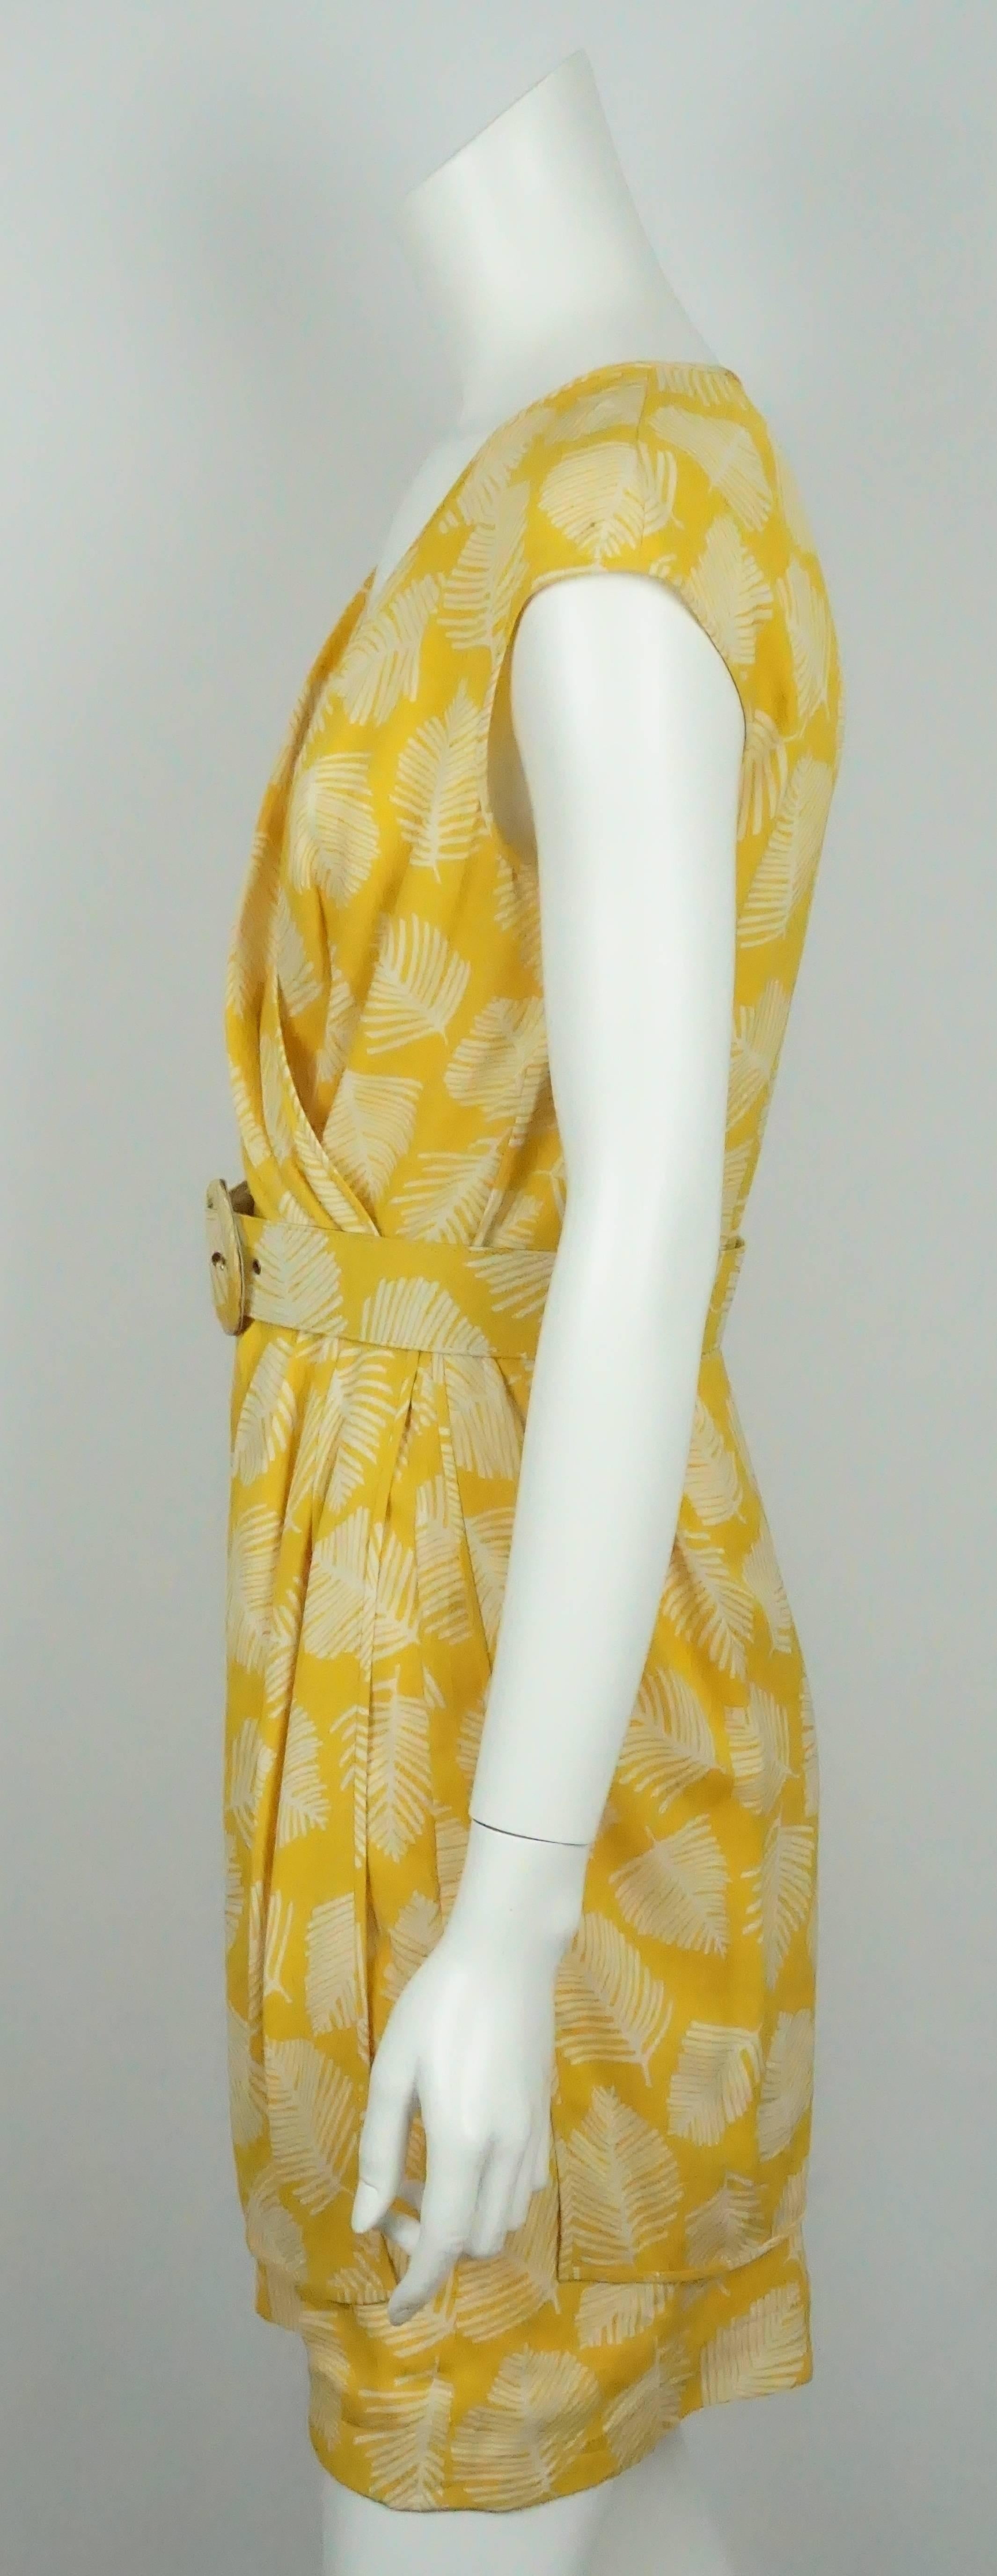 Valentino Yellow & White Cap Sleeve w/ Leaf Print - 8  This gorgeous silk blend dress is in good condition. There are some minor spots on the left shoulder. The dress has cross front that creates a v neck. It has the illusion of a wrap around dress.